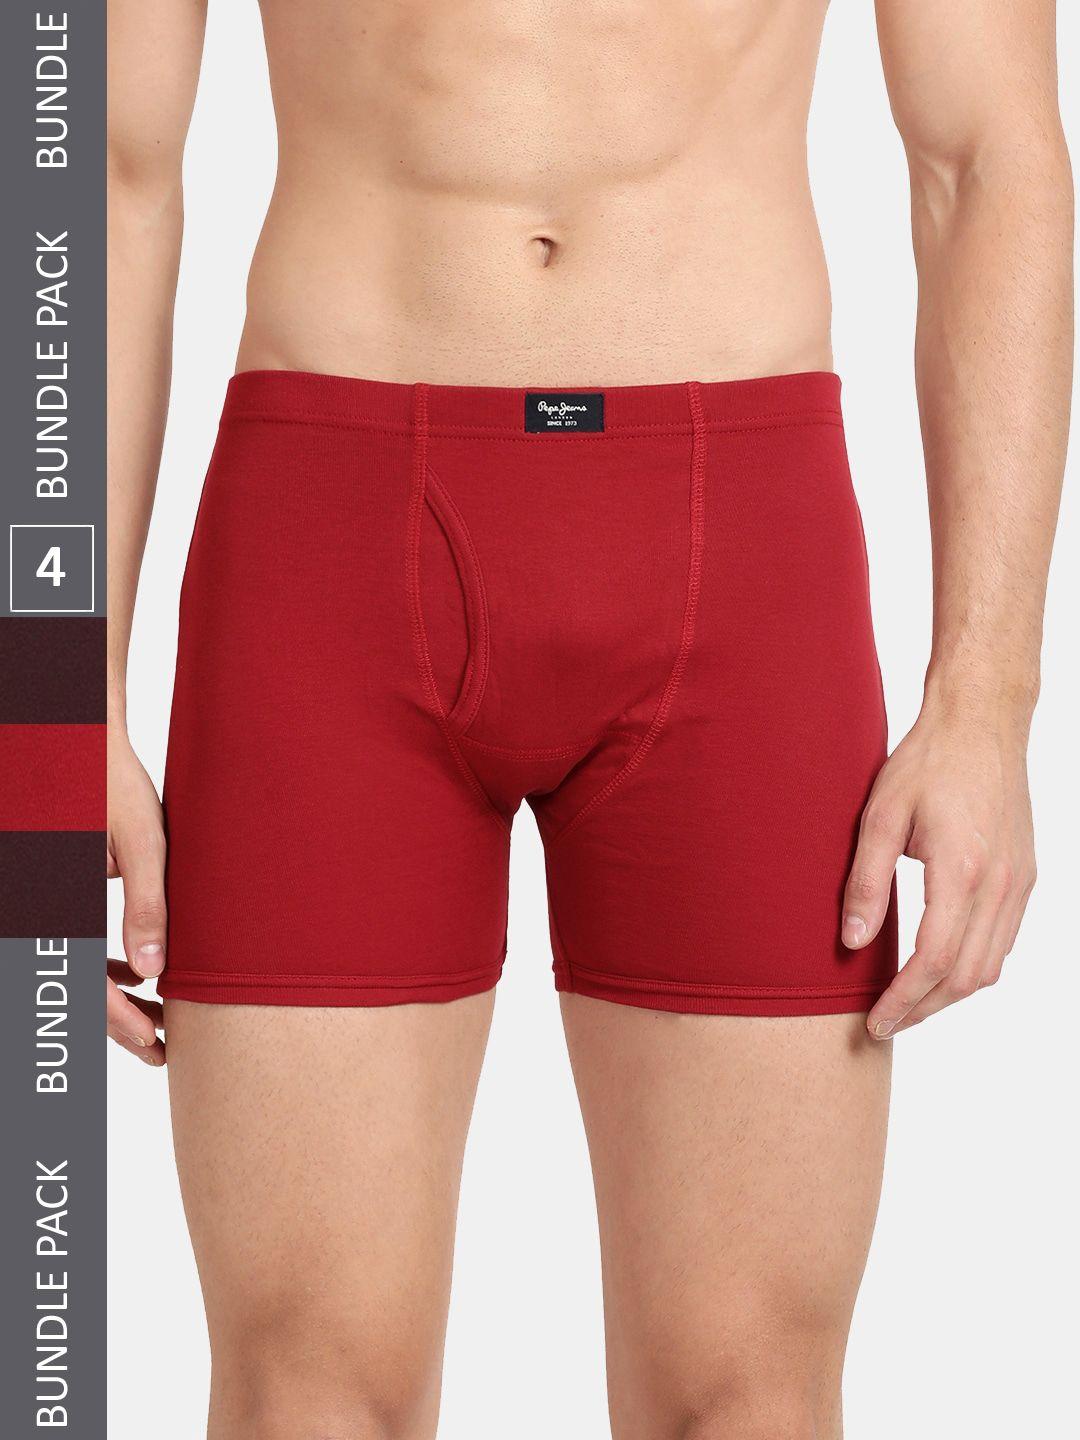 pepe jeans men pack of 4 regular fit cotton trunks clt01 burgand parry red